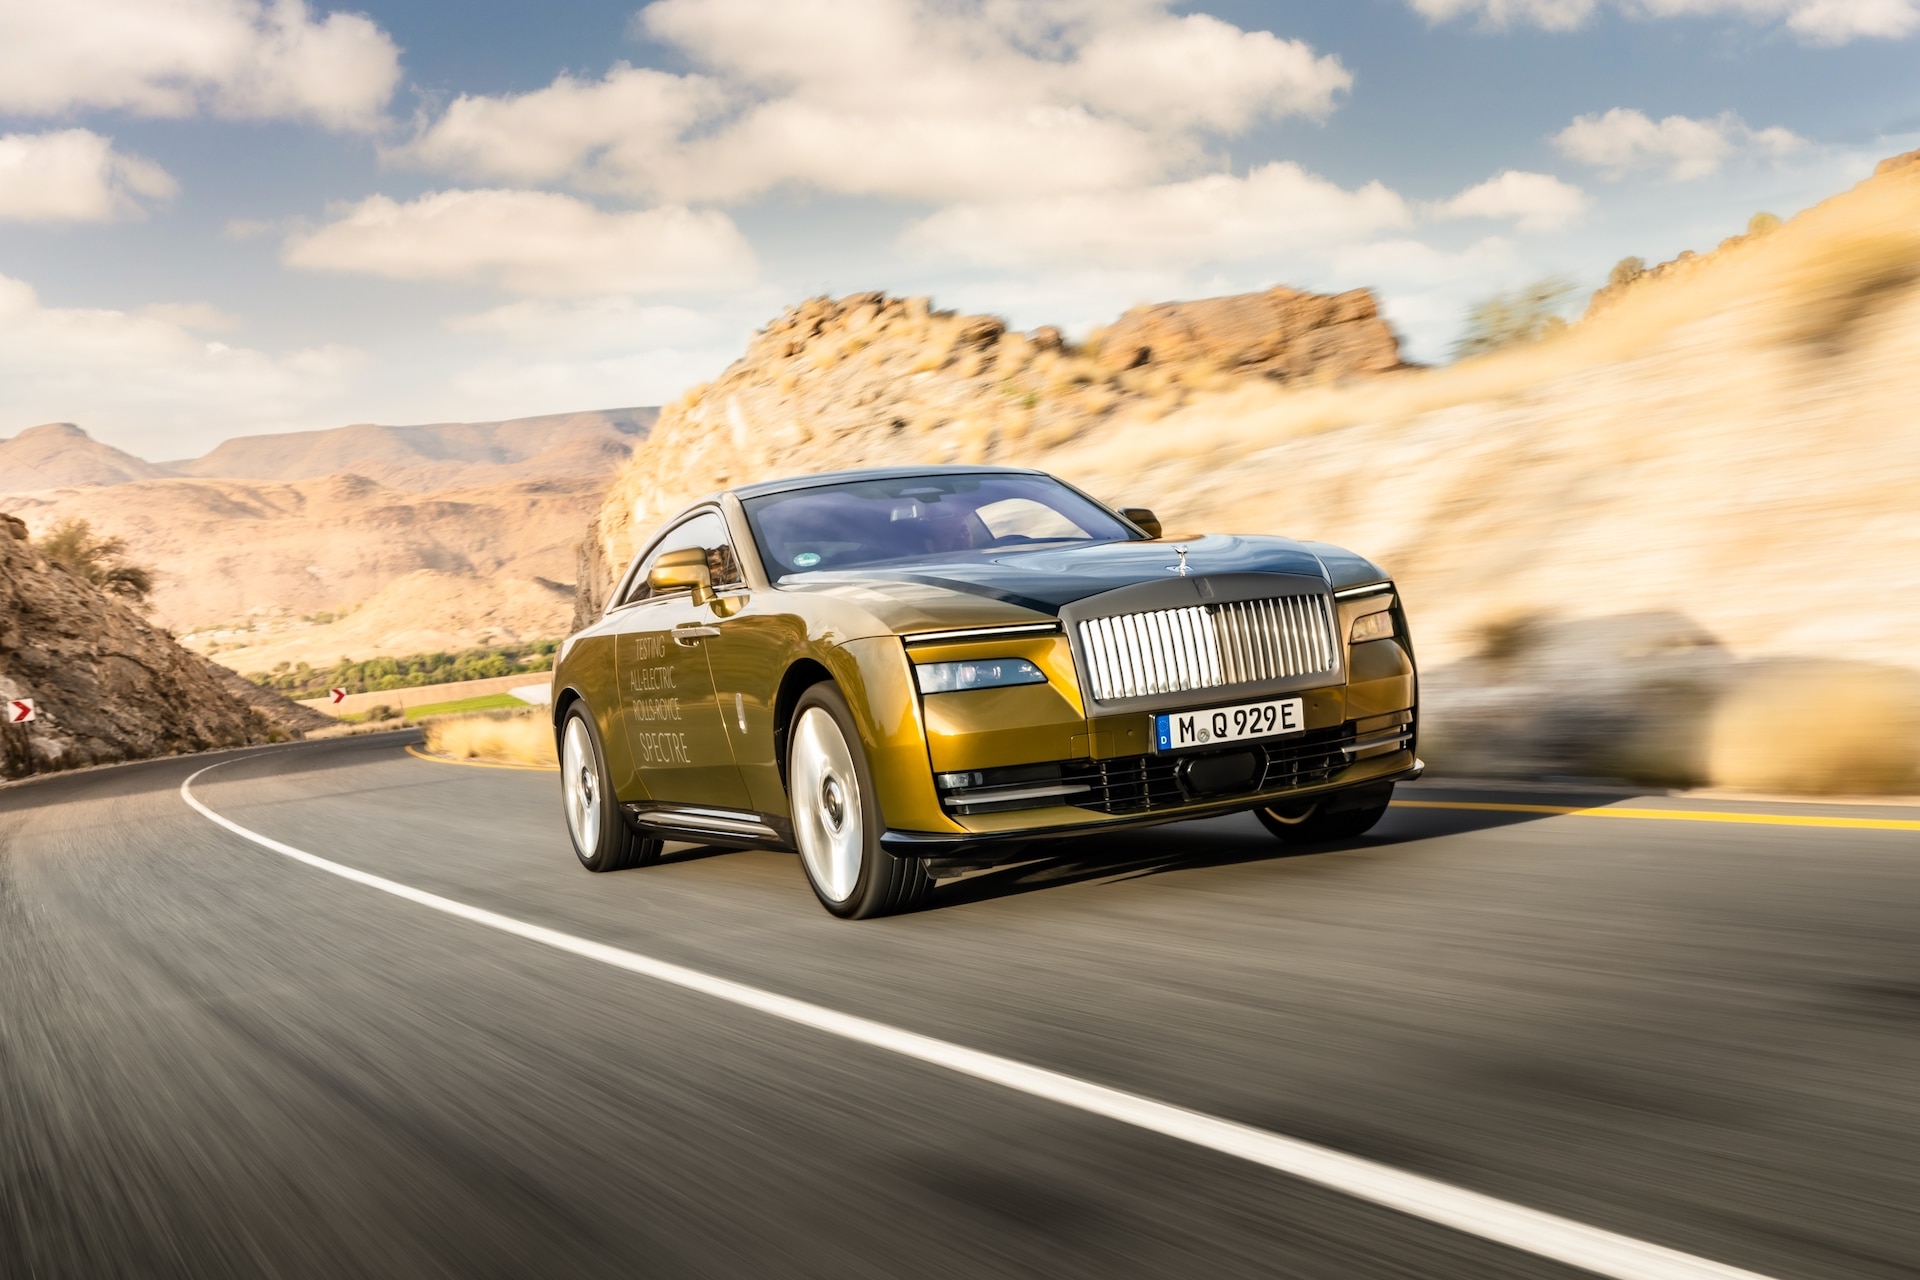 Rolls-Royce Spectre Undergoes Extreme Testing to Elevate the Benchmark of Automotive Excellence